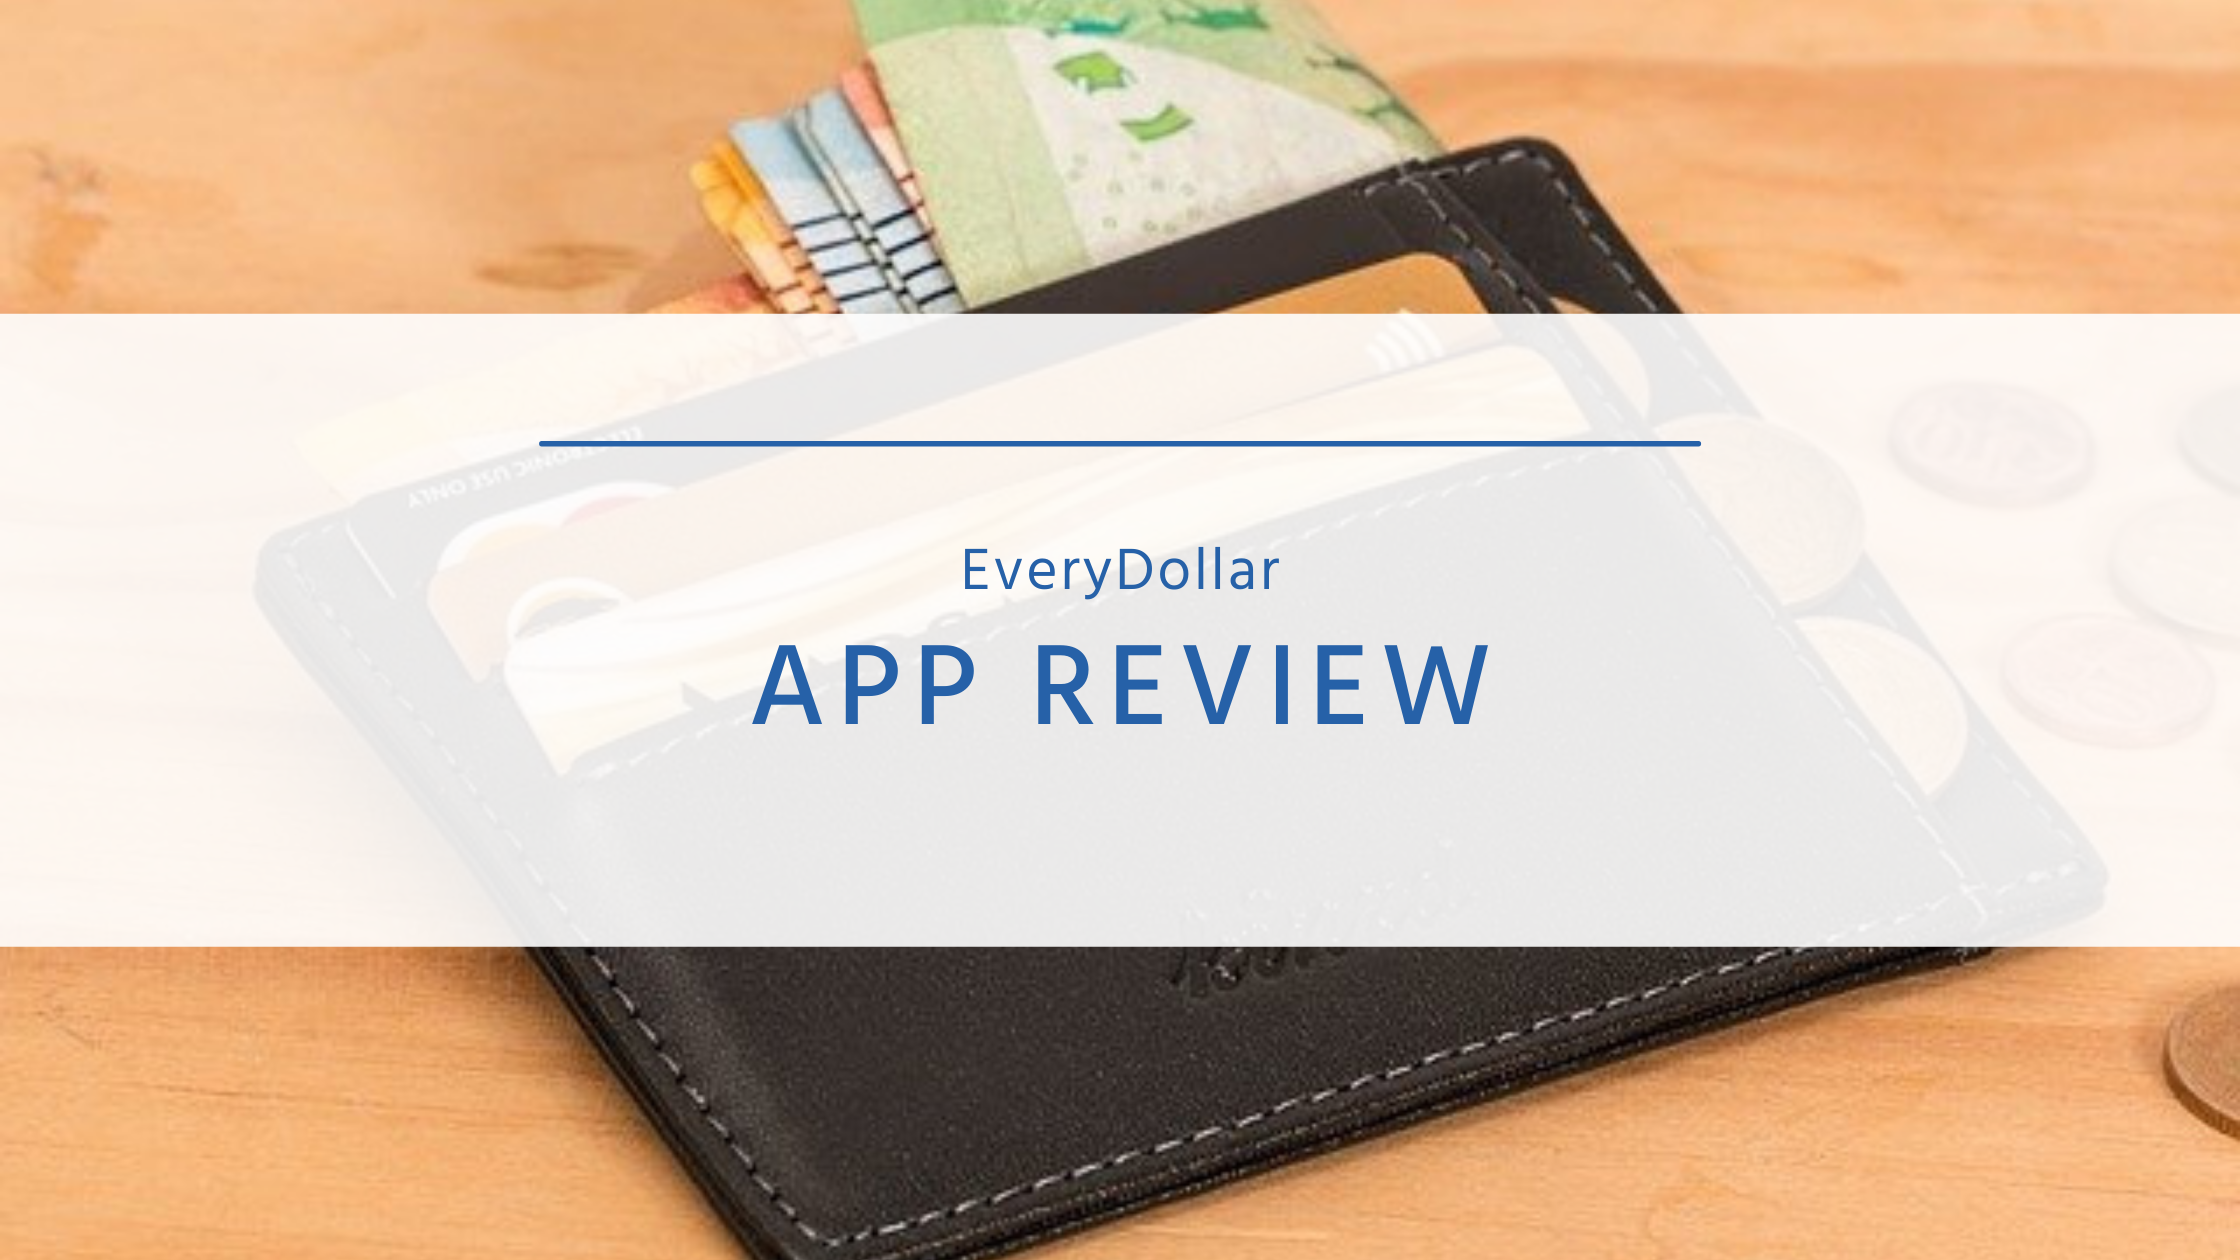 EveryDollar App Review Cost, Features, Pros, Cons & More!